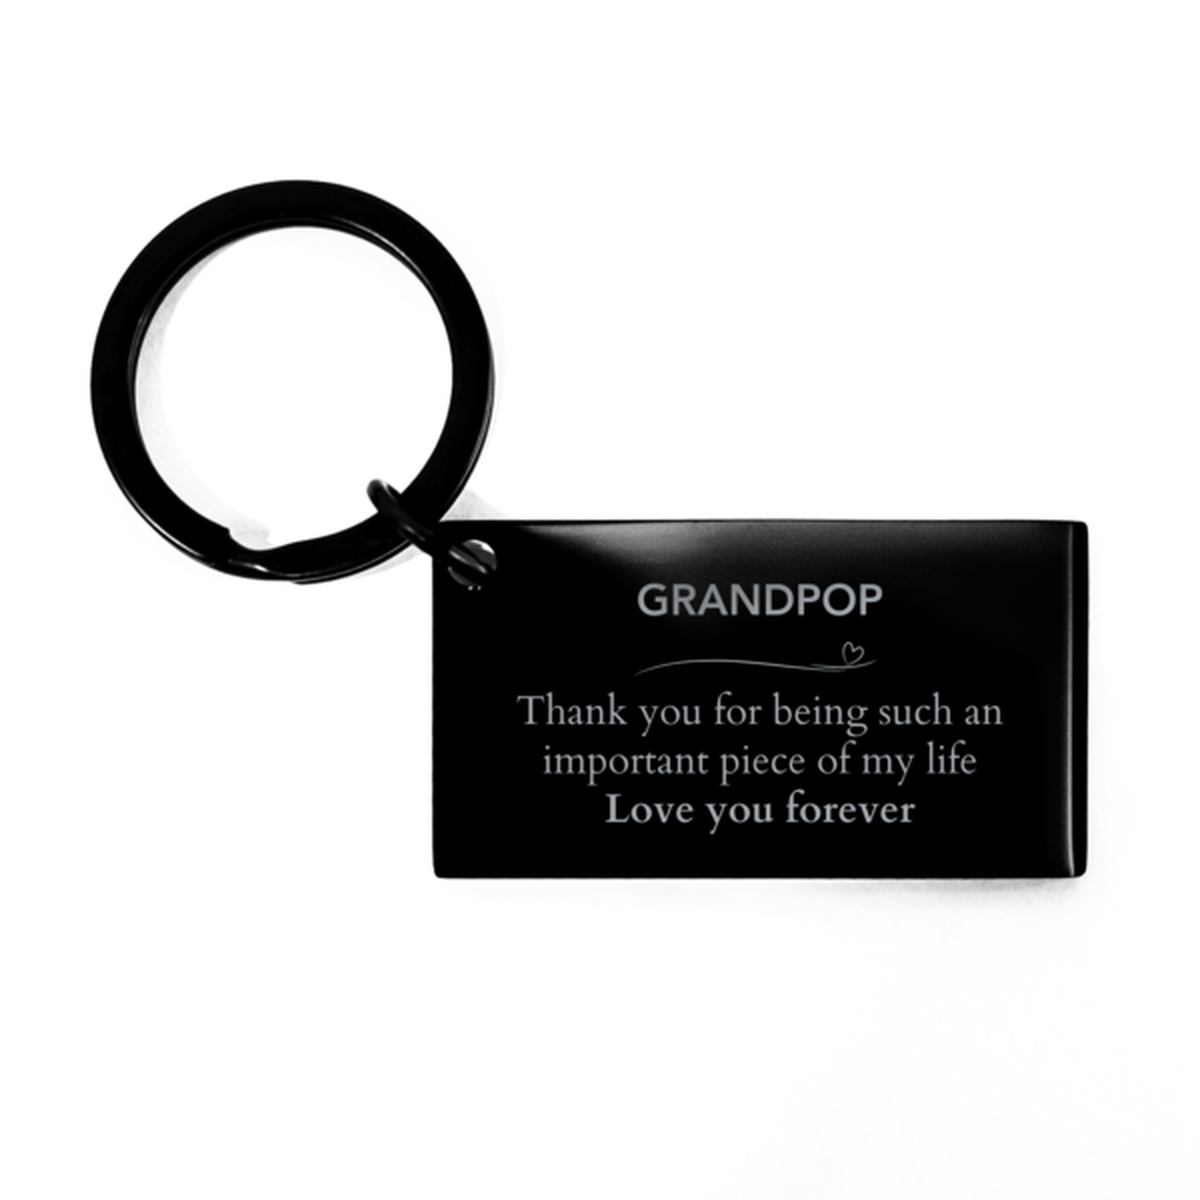 Appropriate Grandpop Keychain Epic Birthday Gifts for Grandpop Thank you for being such an important piece of my life Grandpop Christmas Mothers Fathers Day